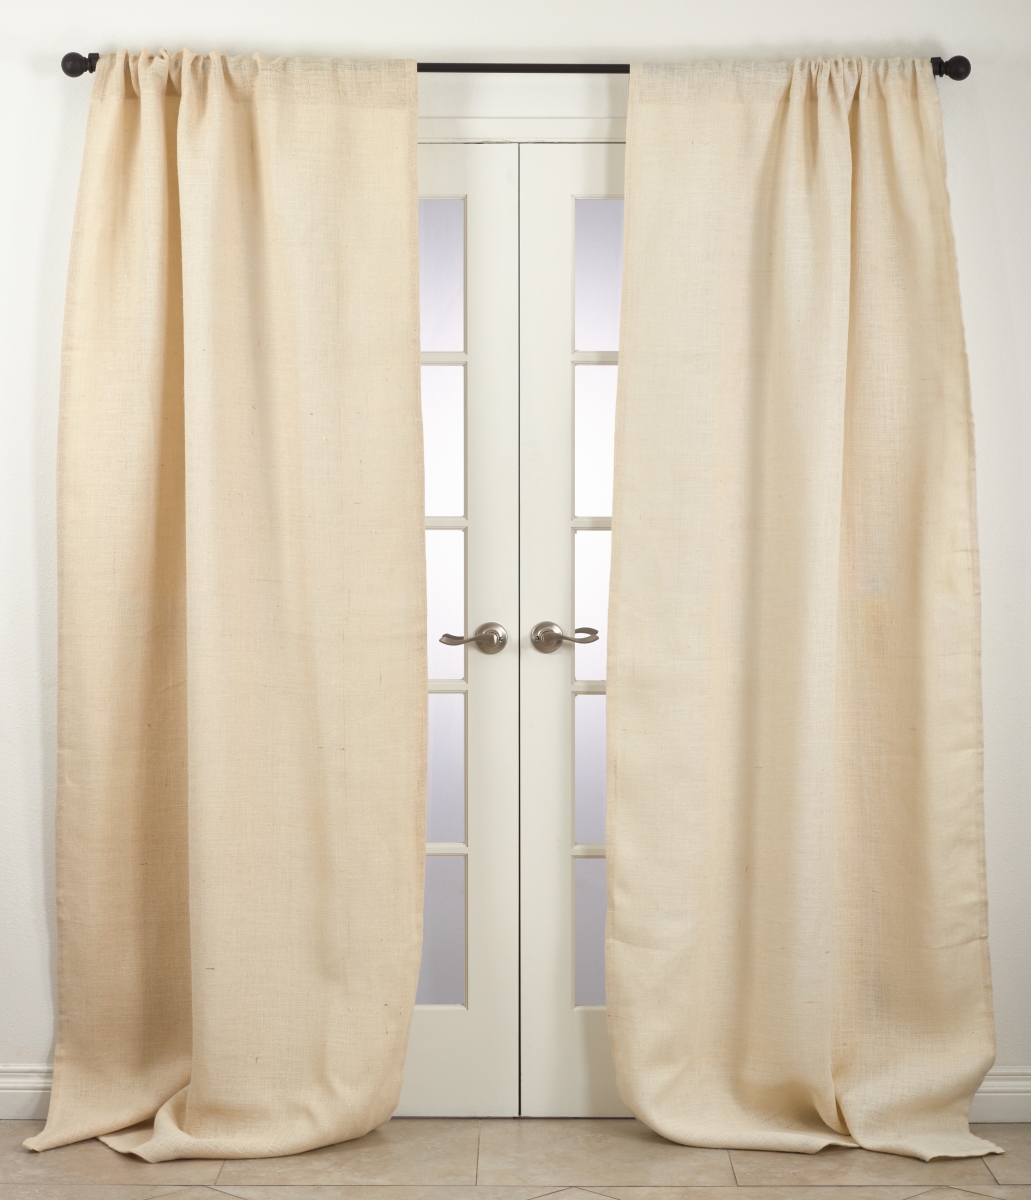 0811.i4296 Open Weave Lined Burlap Curtain Panel - Ivory